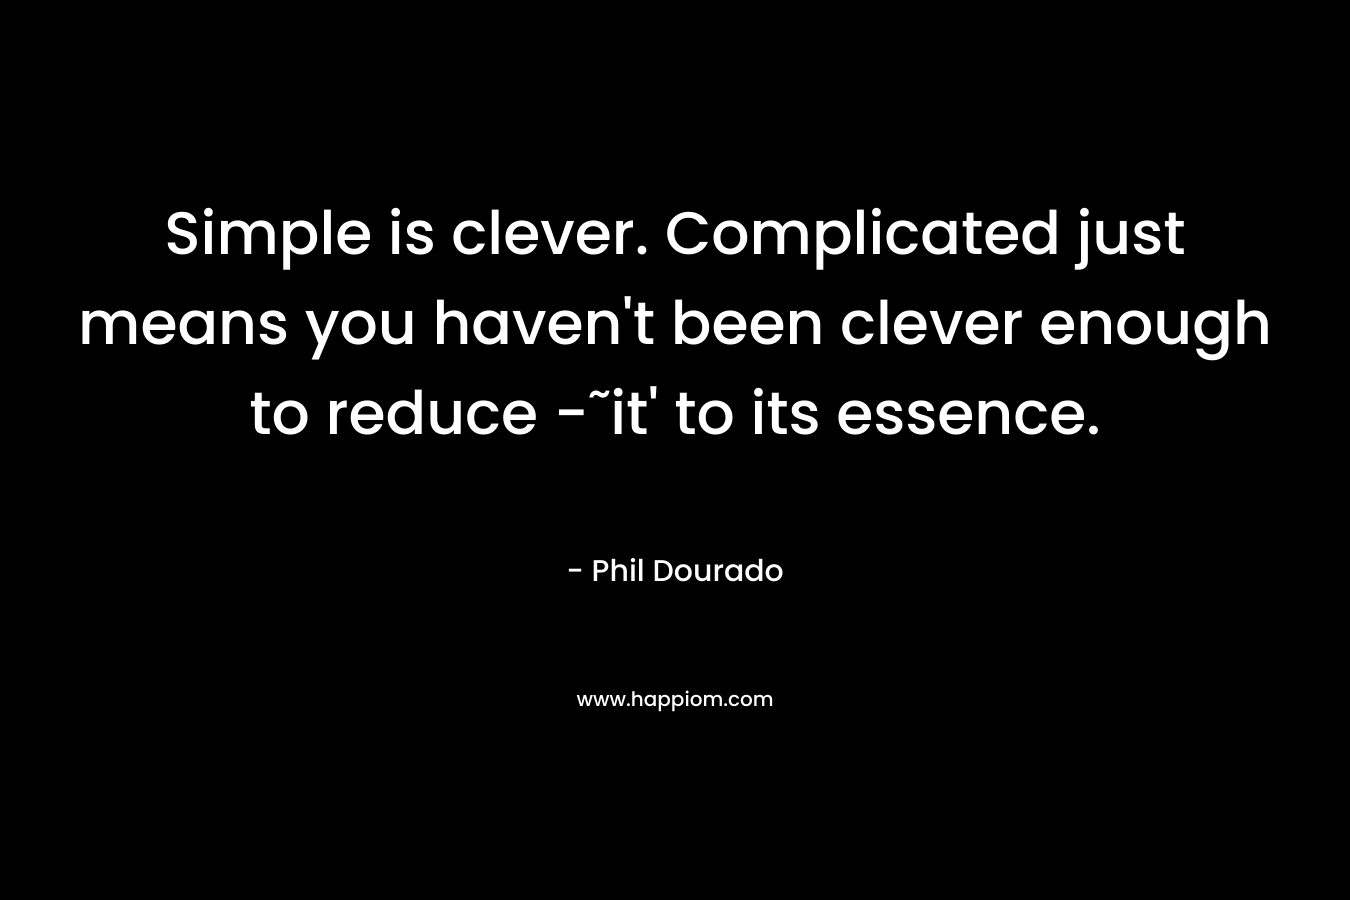 Simple is clever. Complicated just means you haven't been clever enough to reduce -˜it' to its essence.